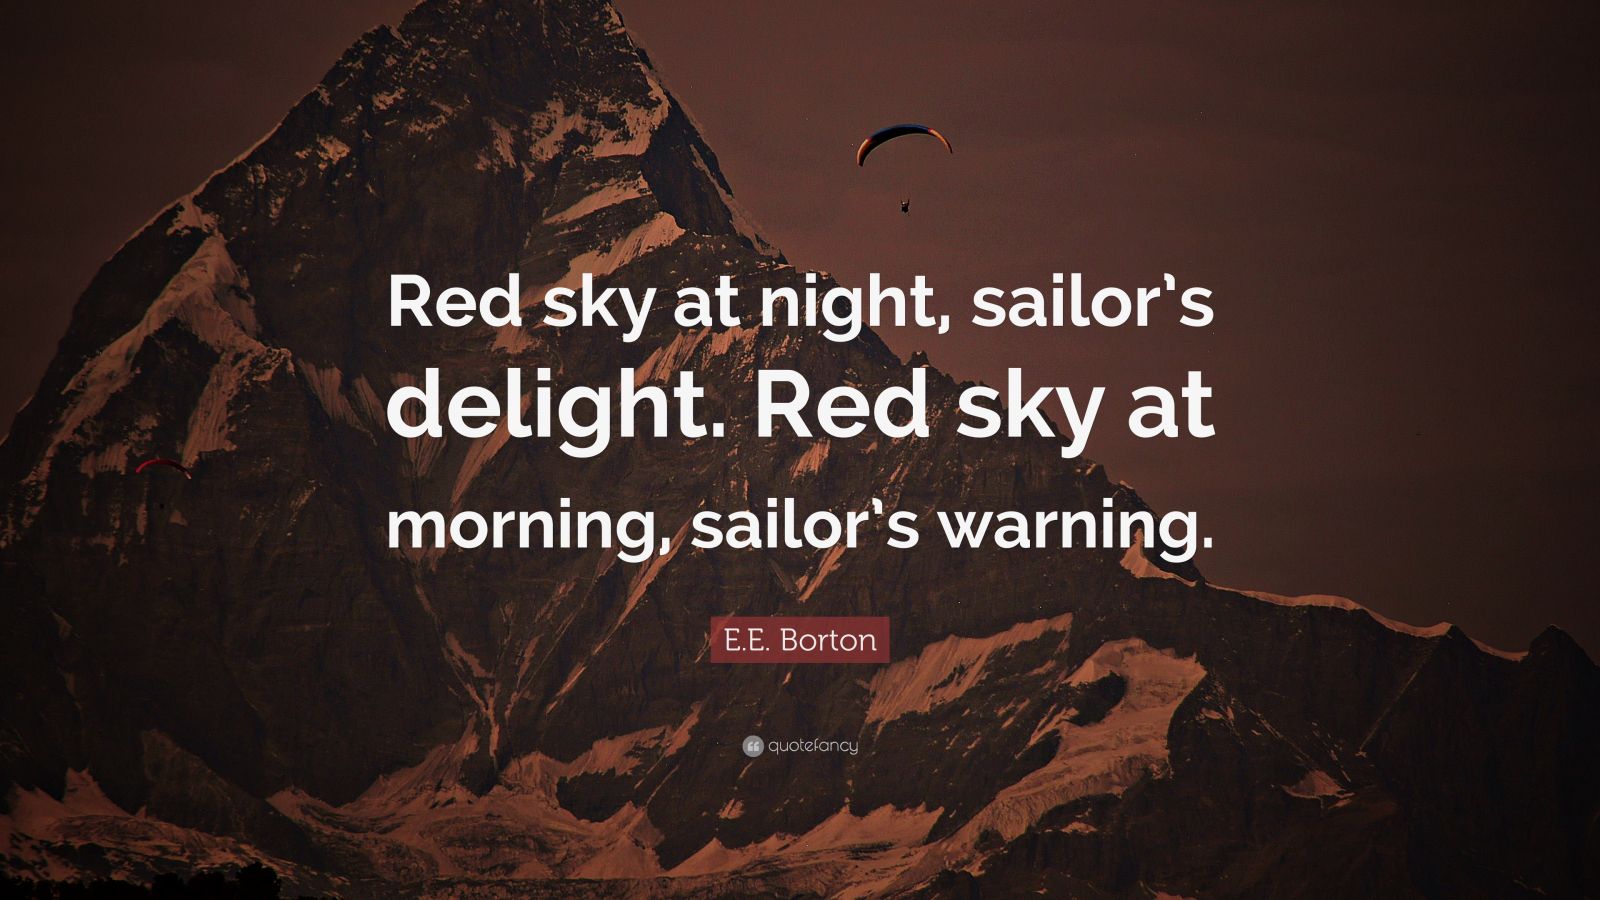 Is the old adage Red sky at night, sailor's delight. Red sky in morning,  sailor's warning true, or is it just an old wives' tale?